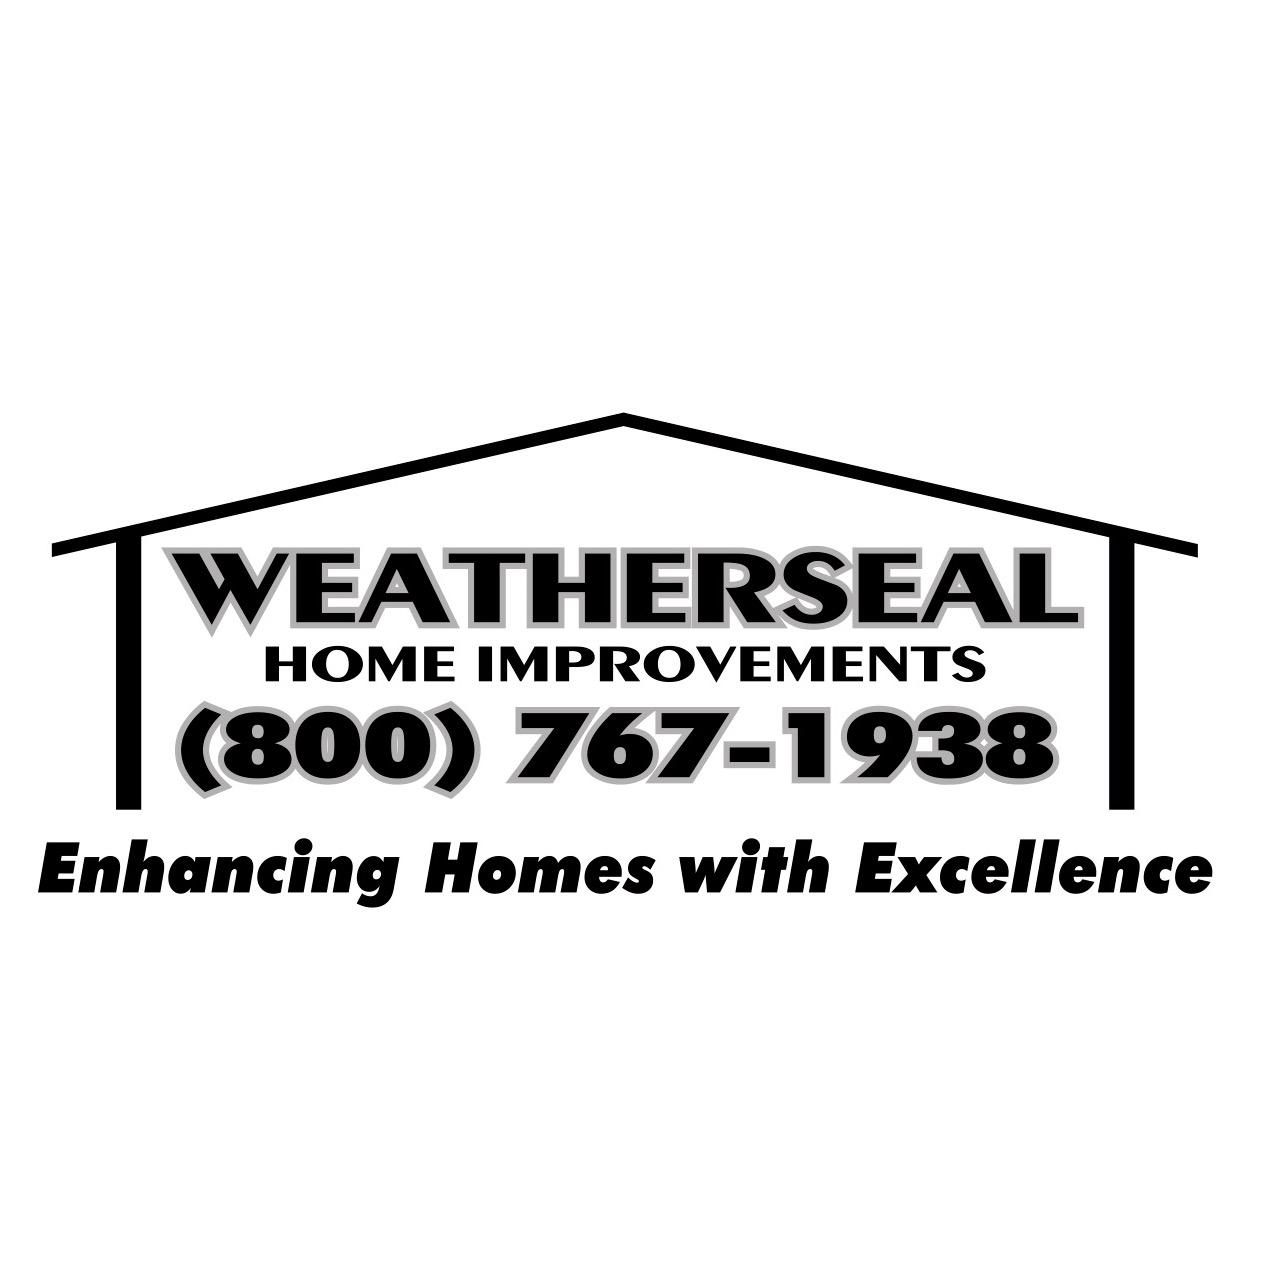 WETHERSEAL HOME IMPROVEMENTS Photo